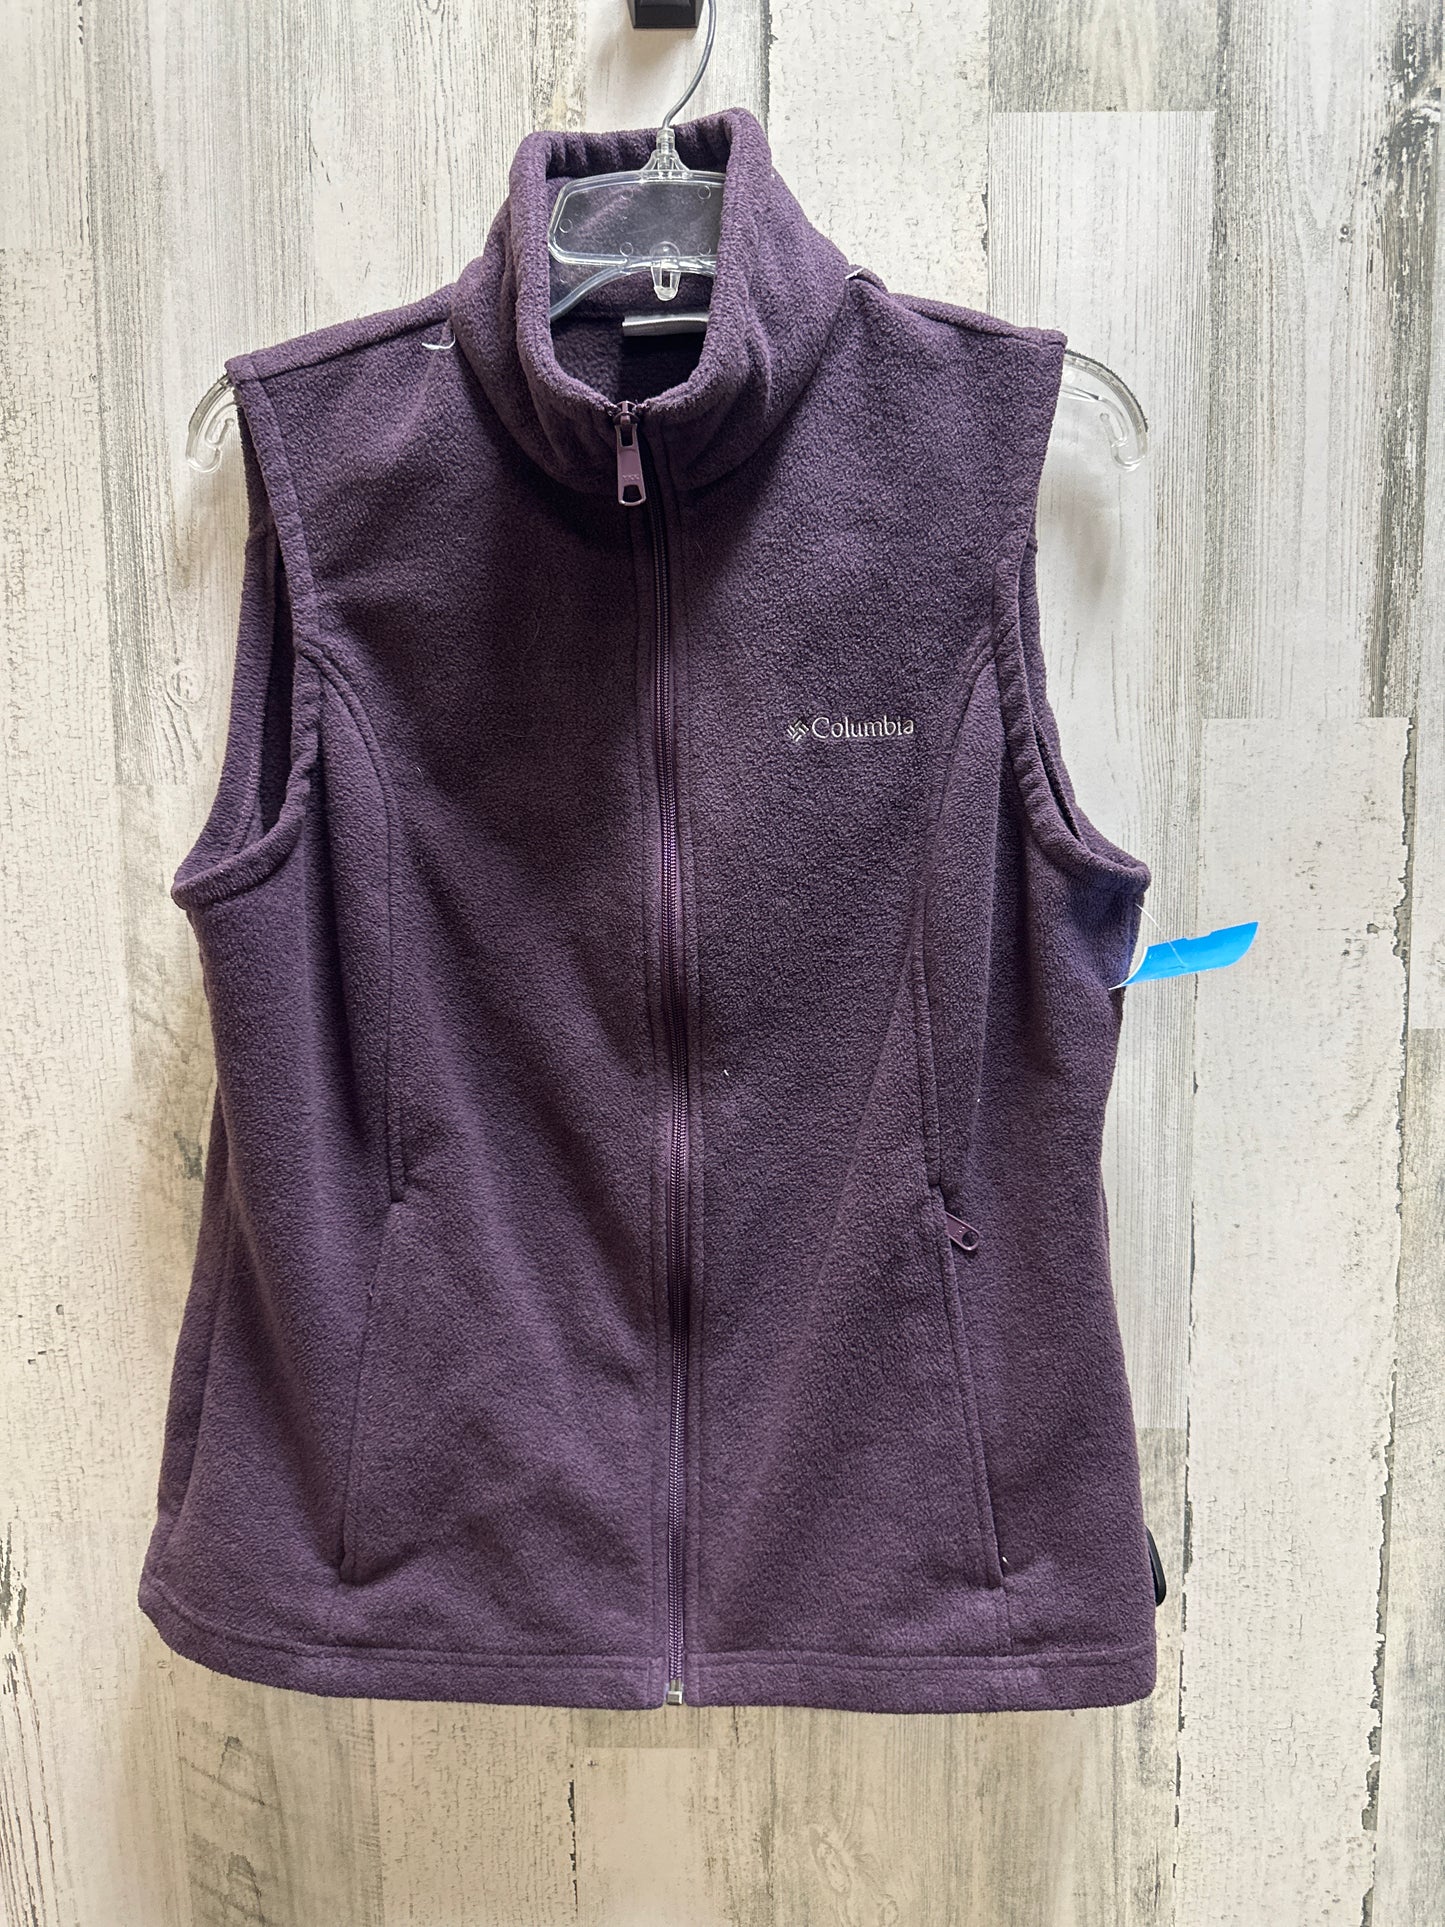 Vest Other By Columbia  Size: L